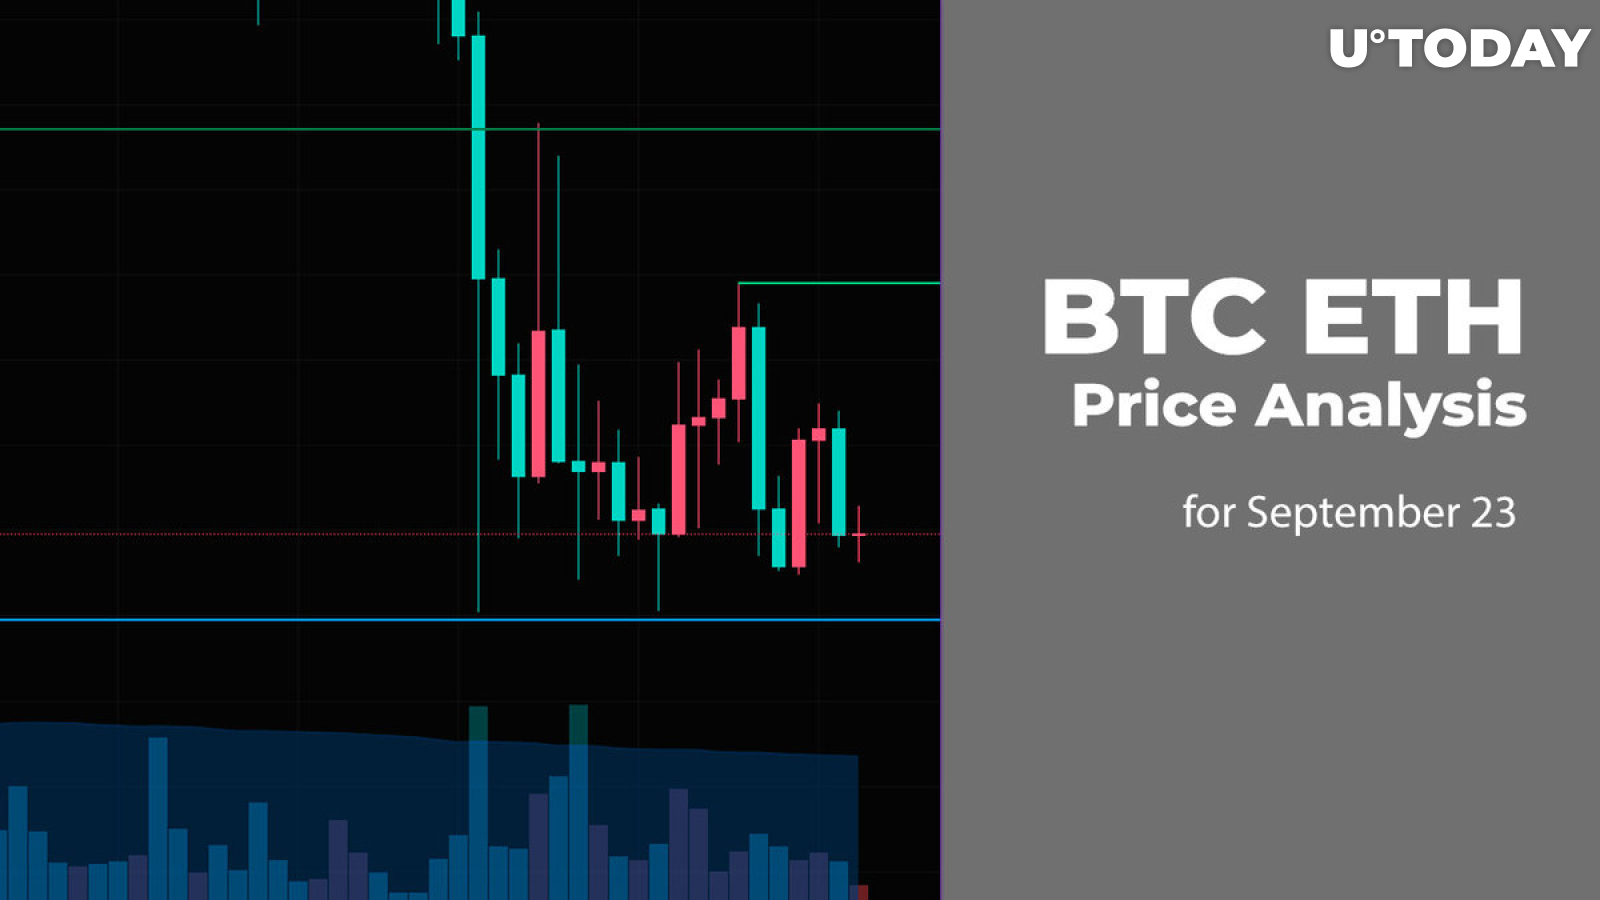 BTC and ETH Price Analysis for September 23